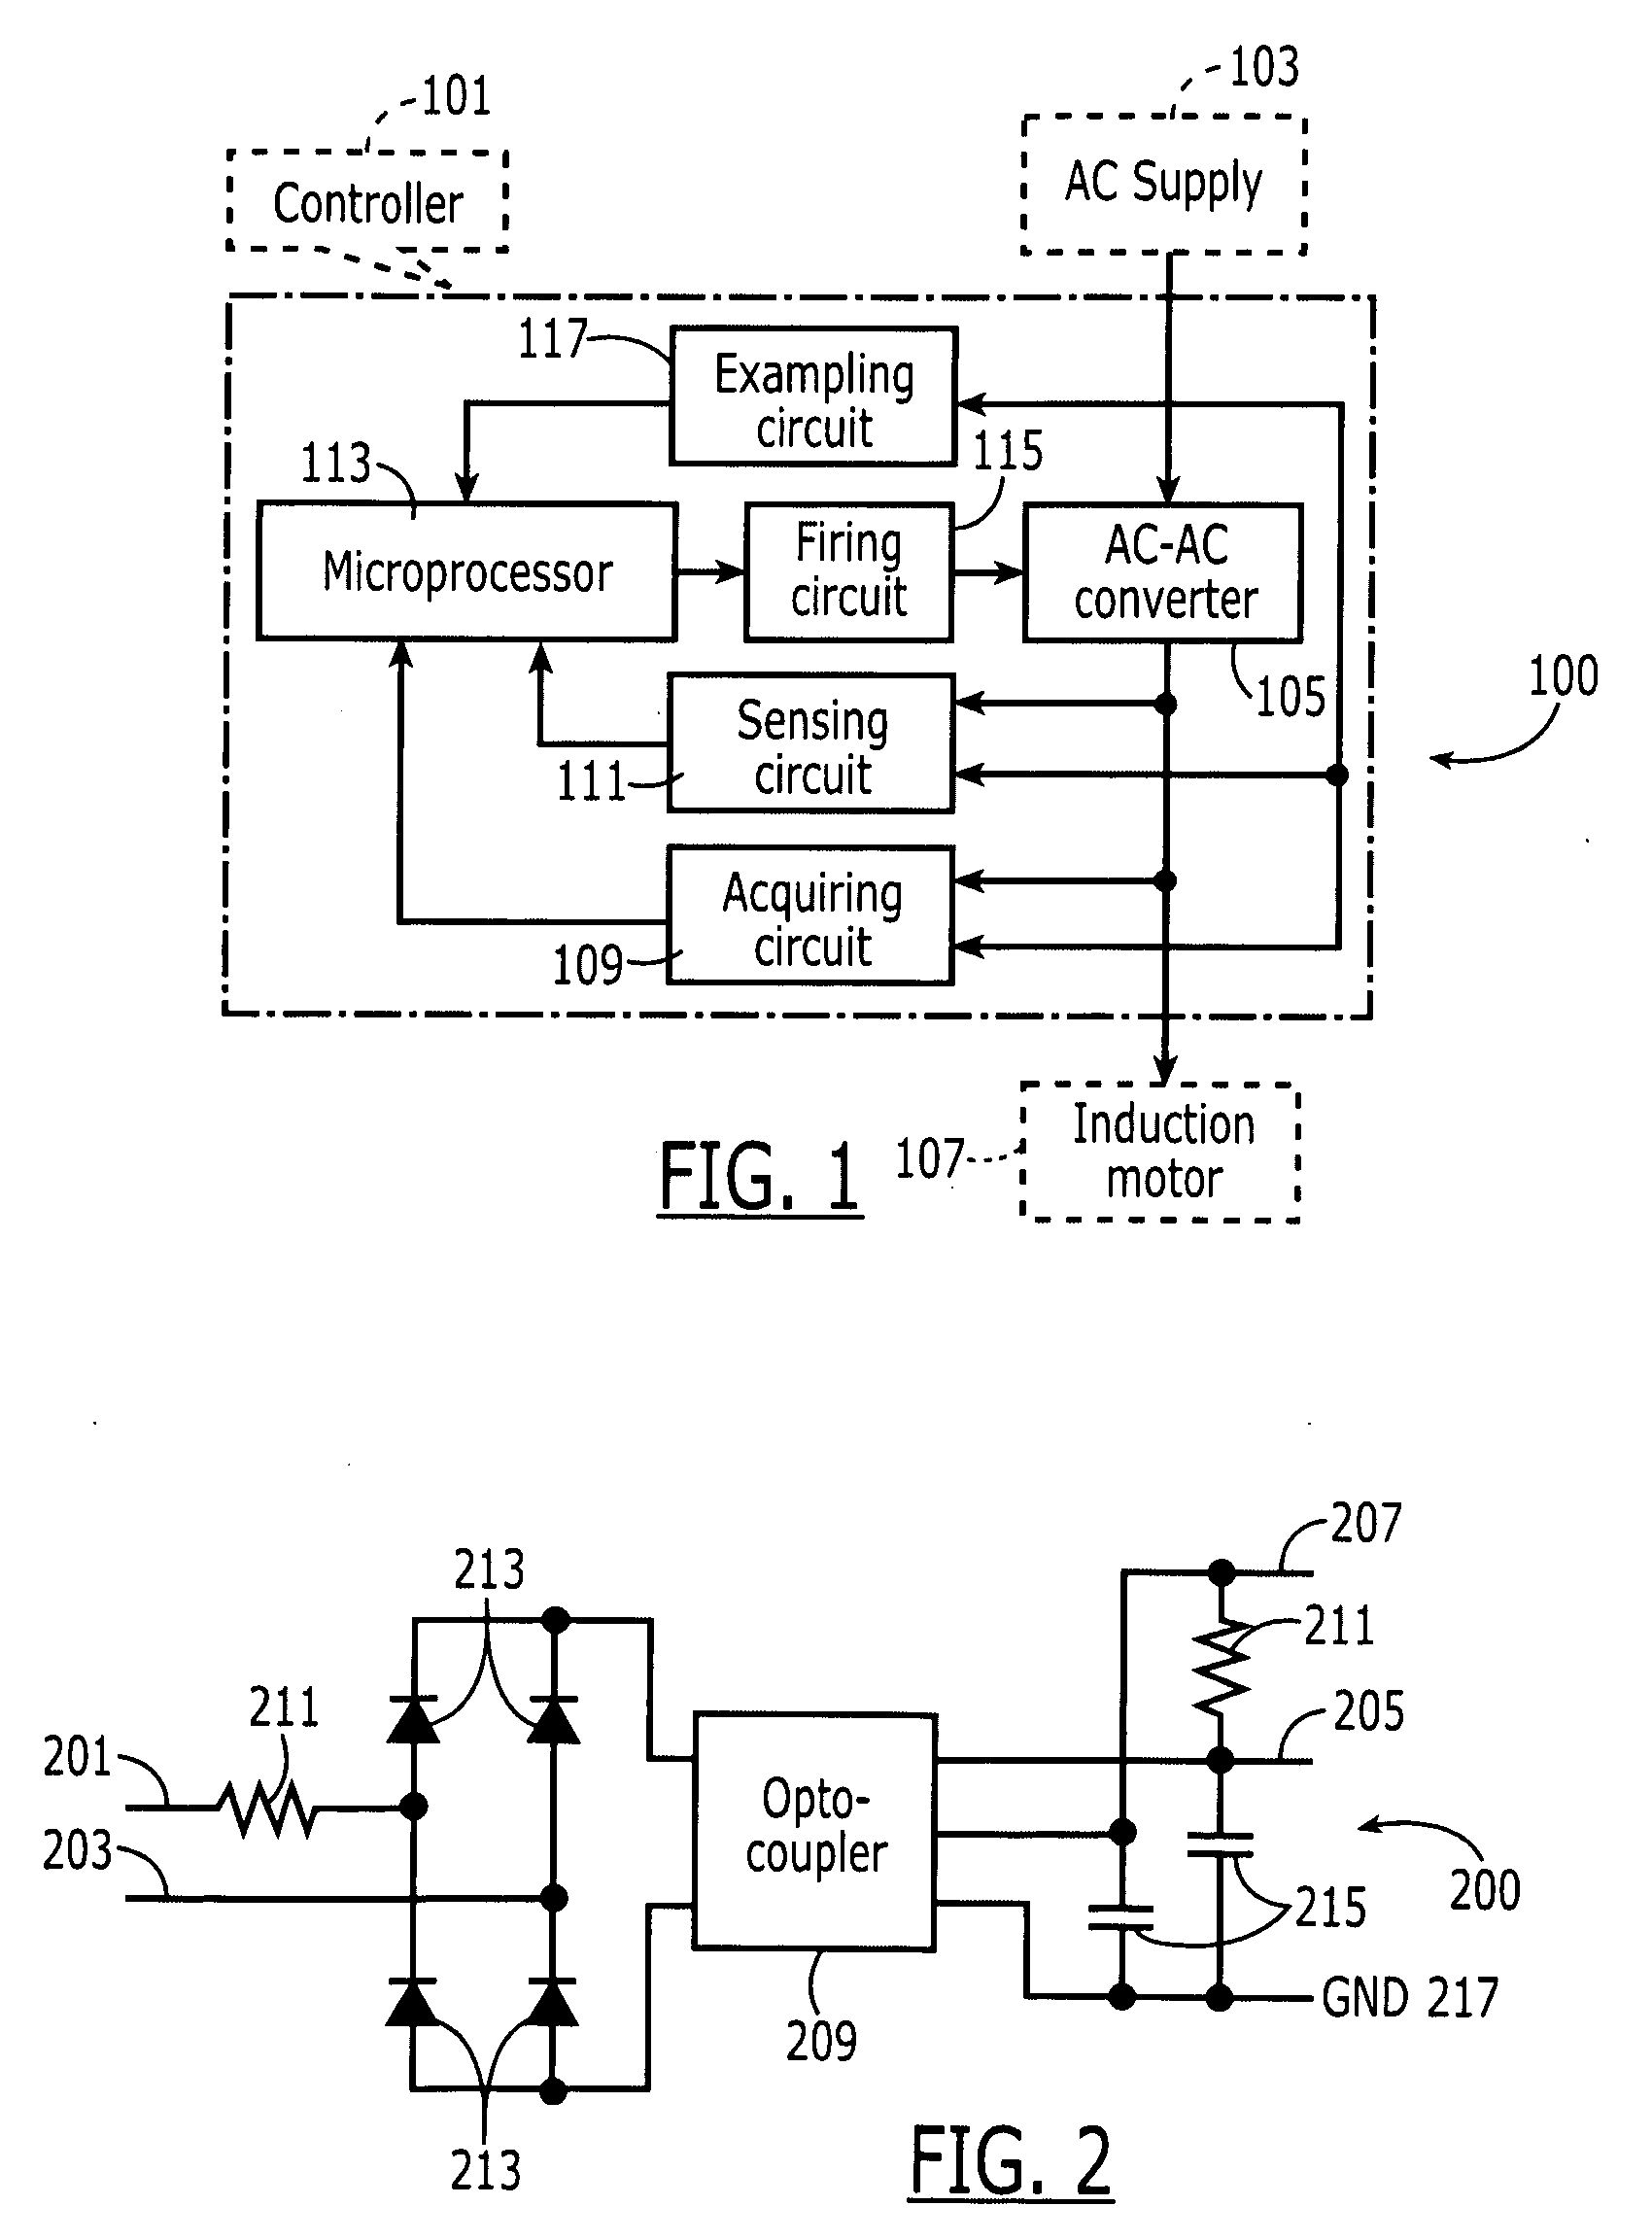 Energy-saving controller for three-phase induction motors